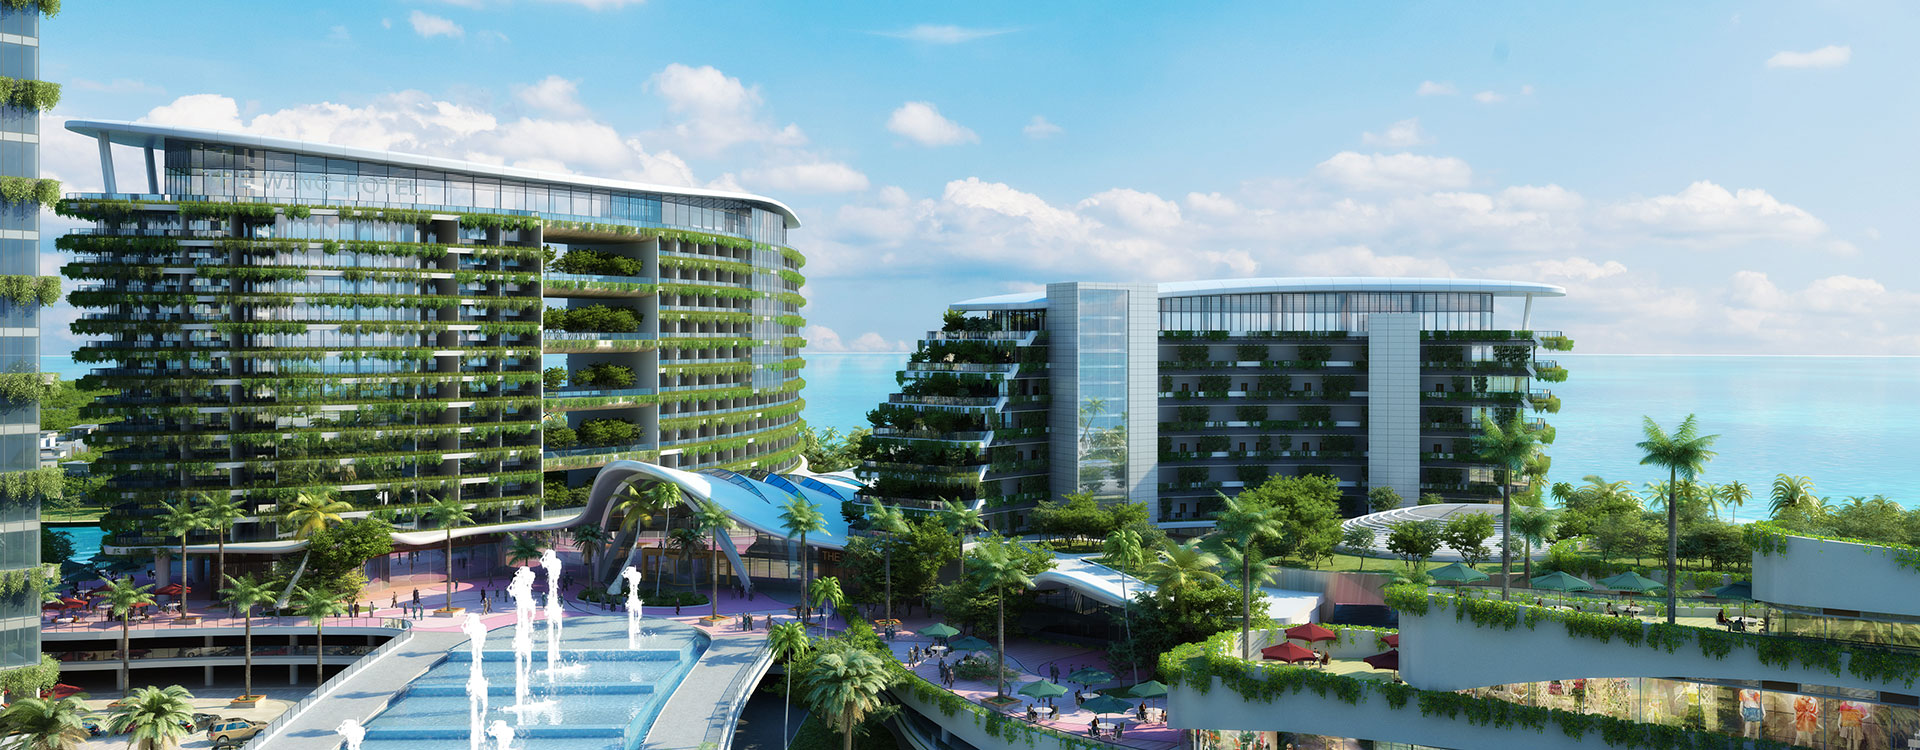 Malaysia Forest City Johor Official News - augenth